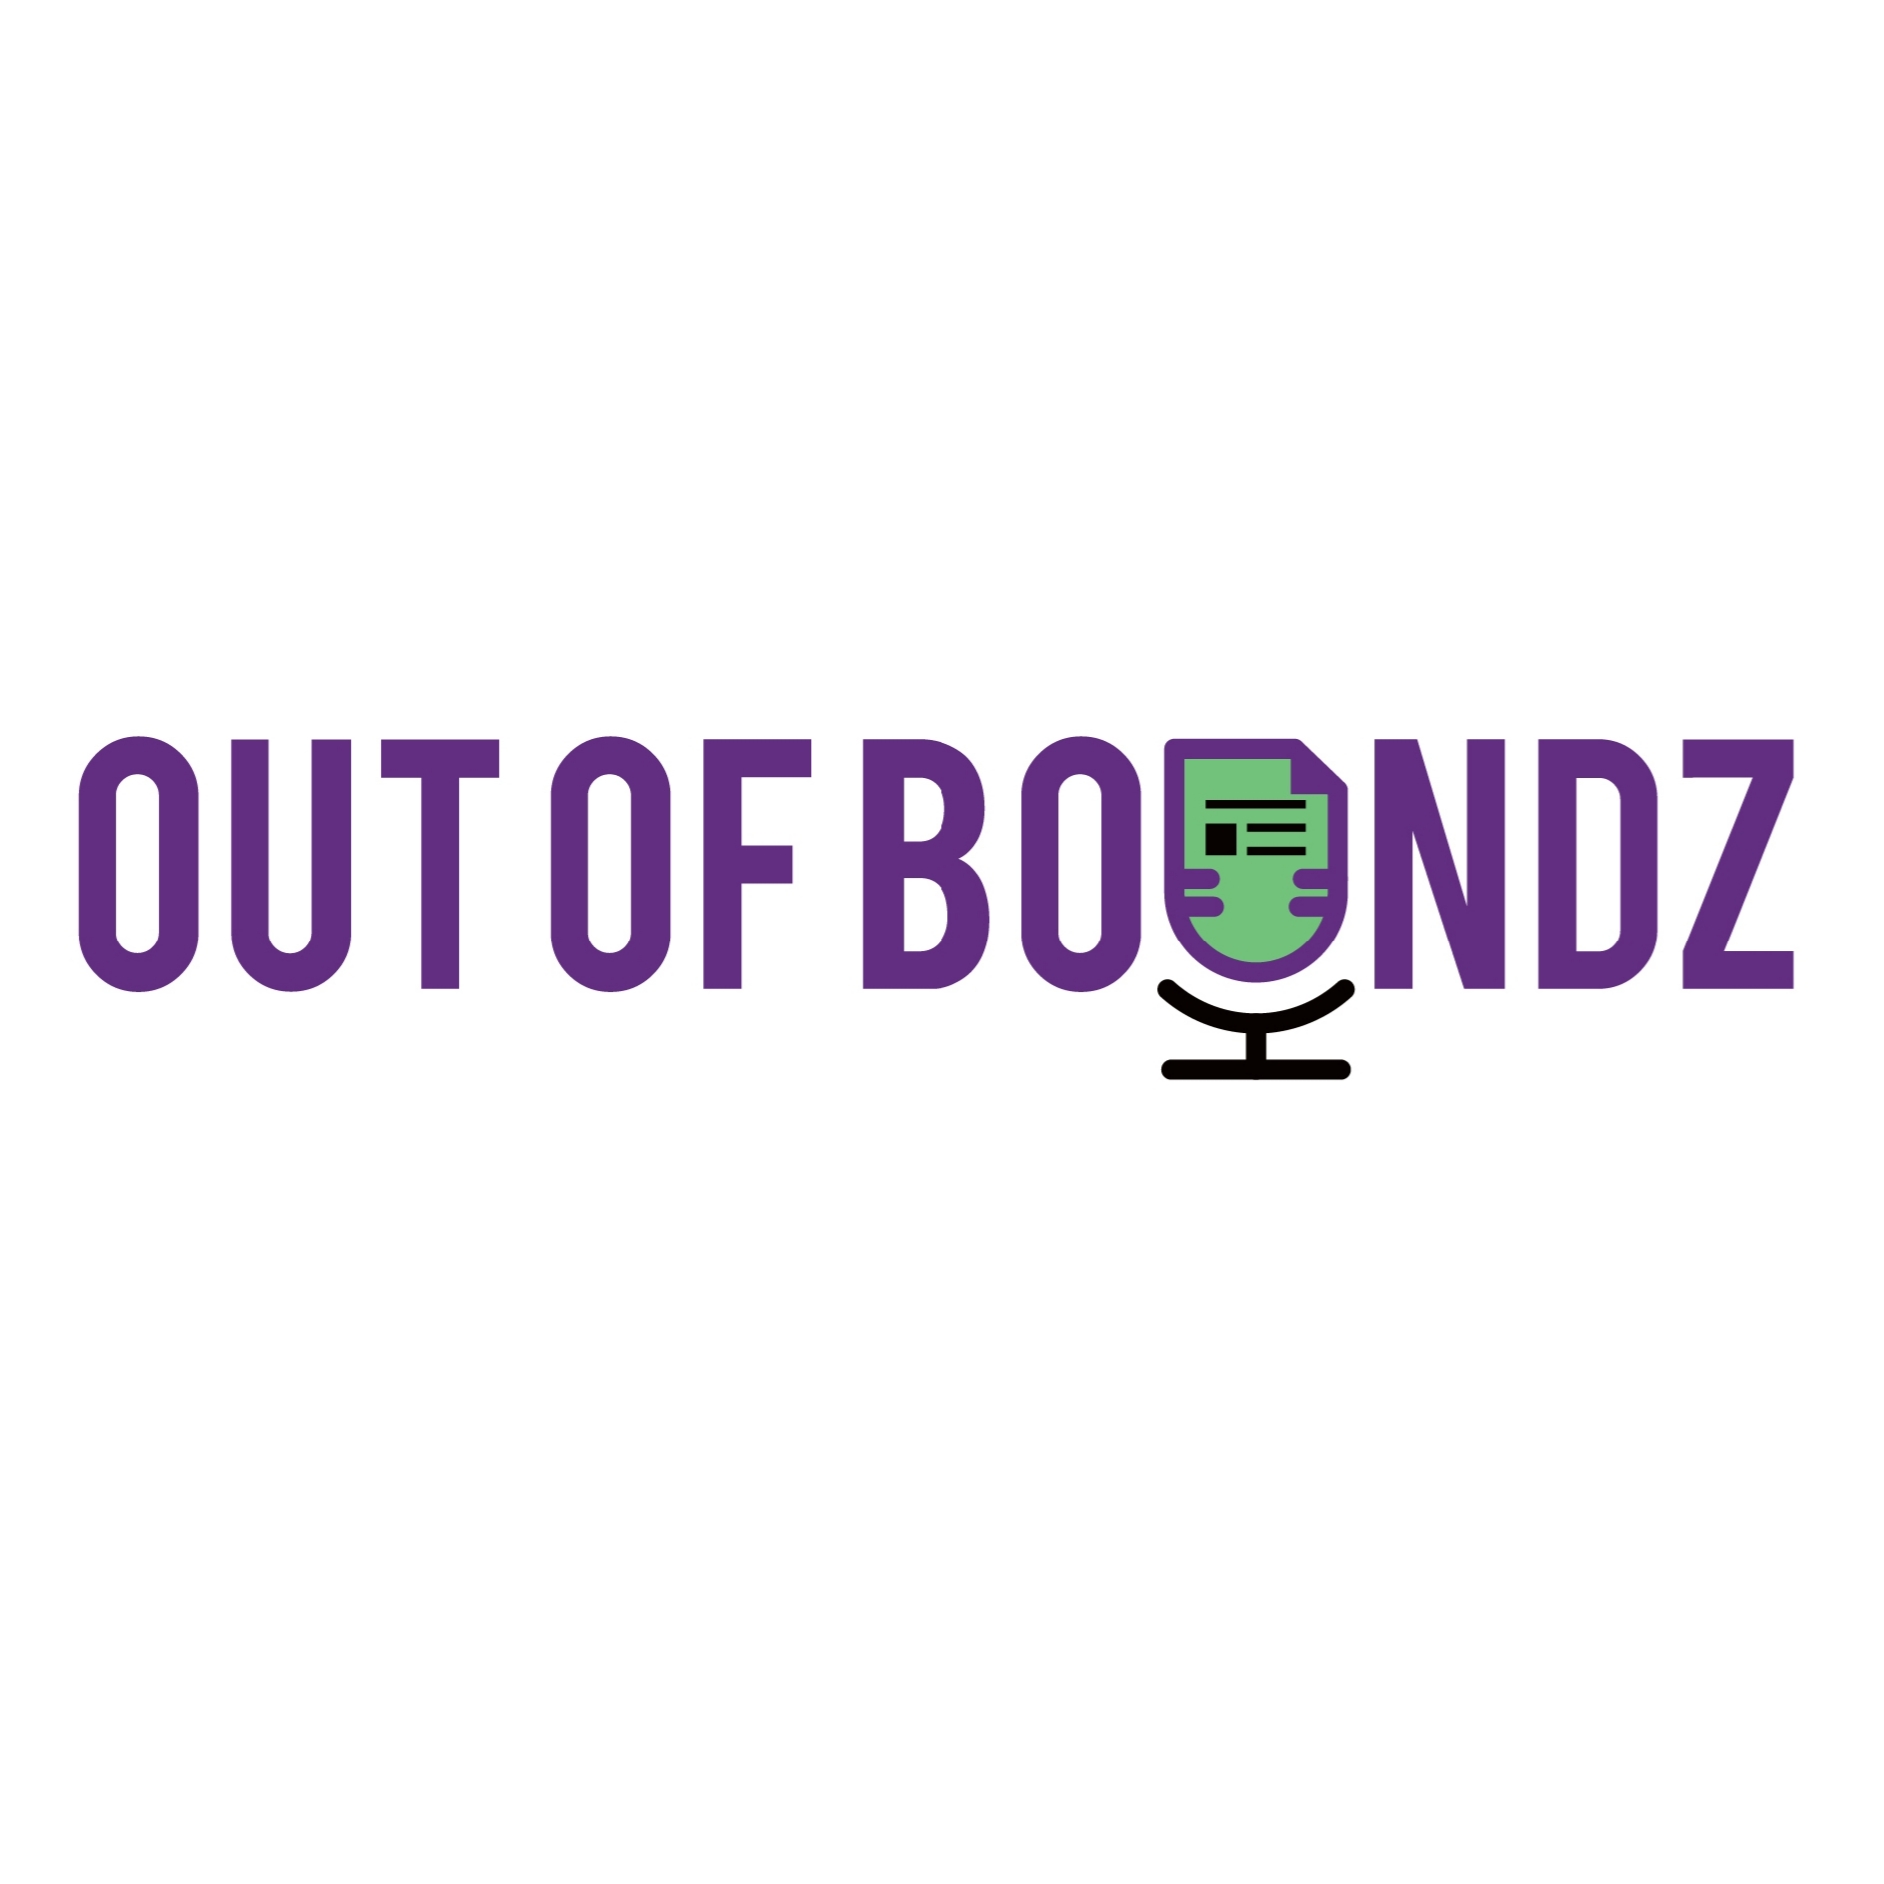 Artwork for Out of Boundz